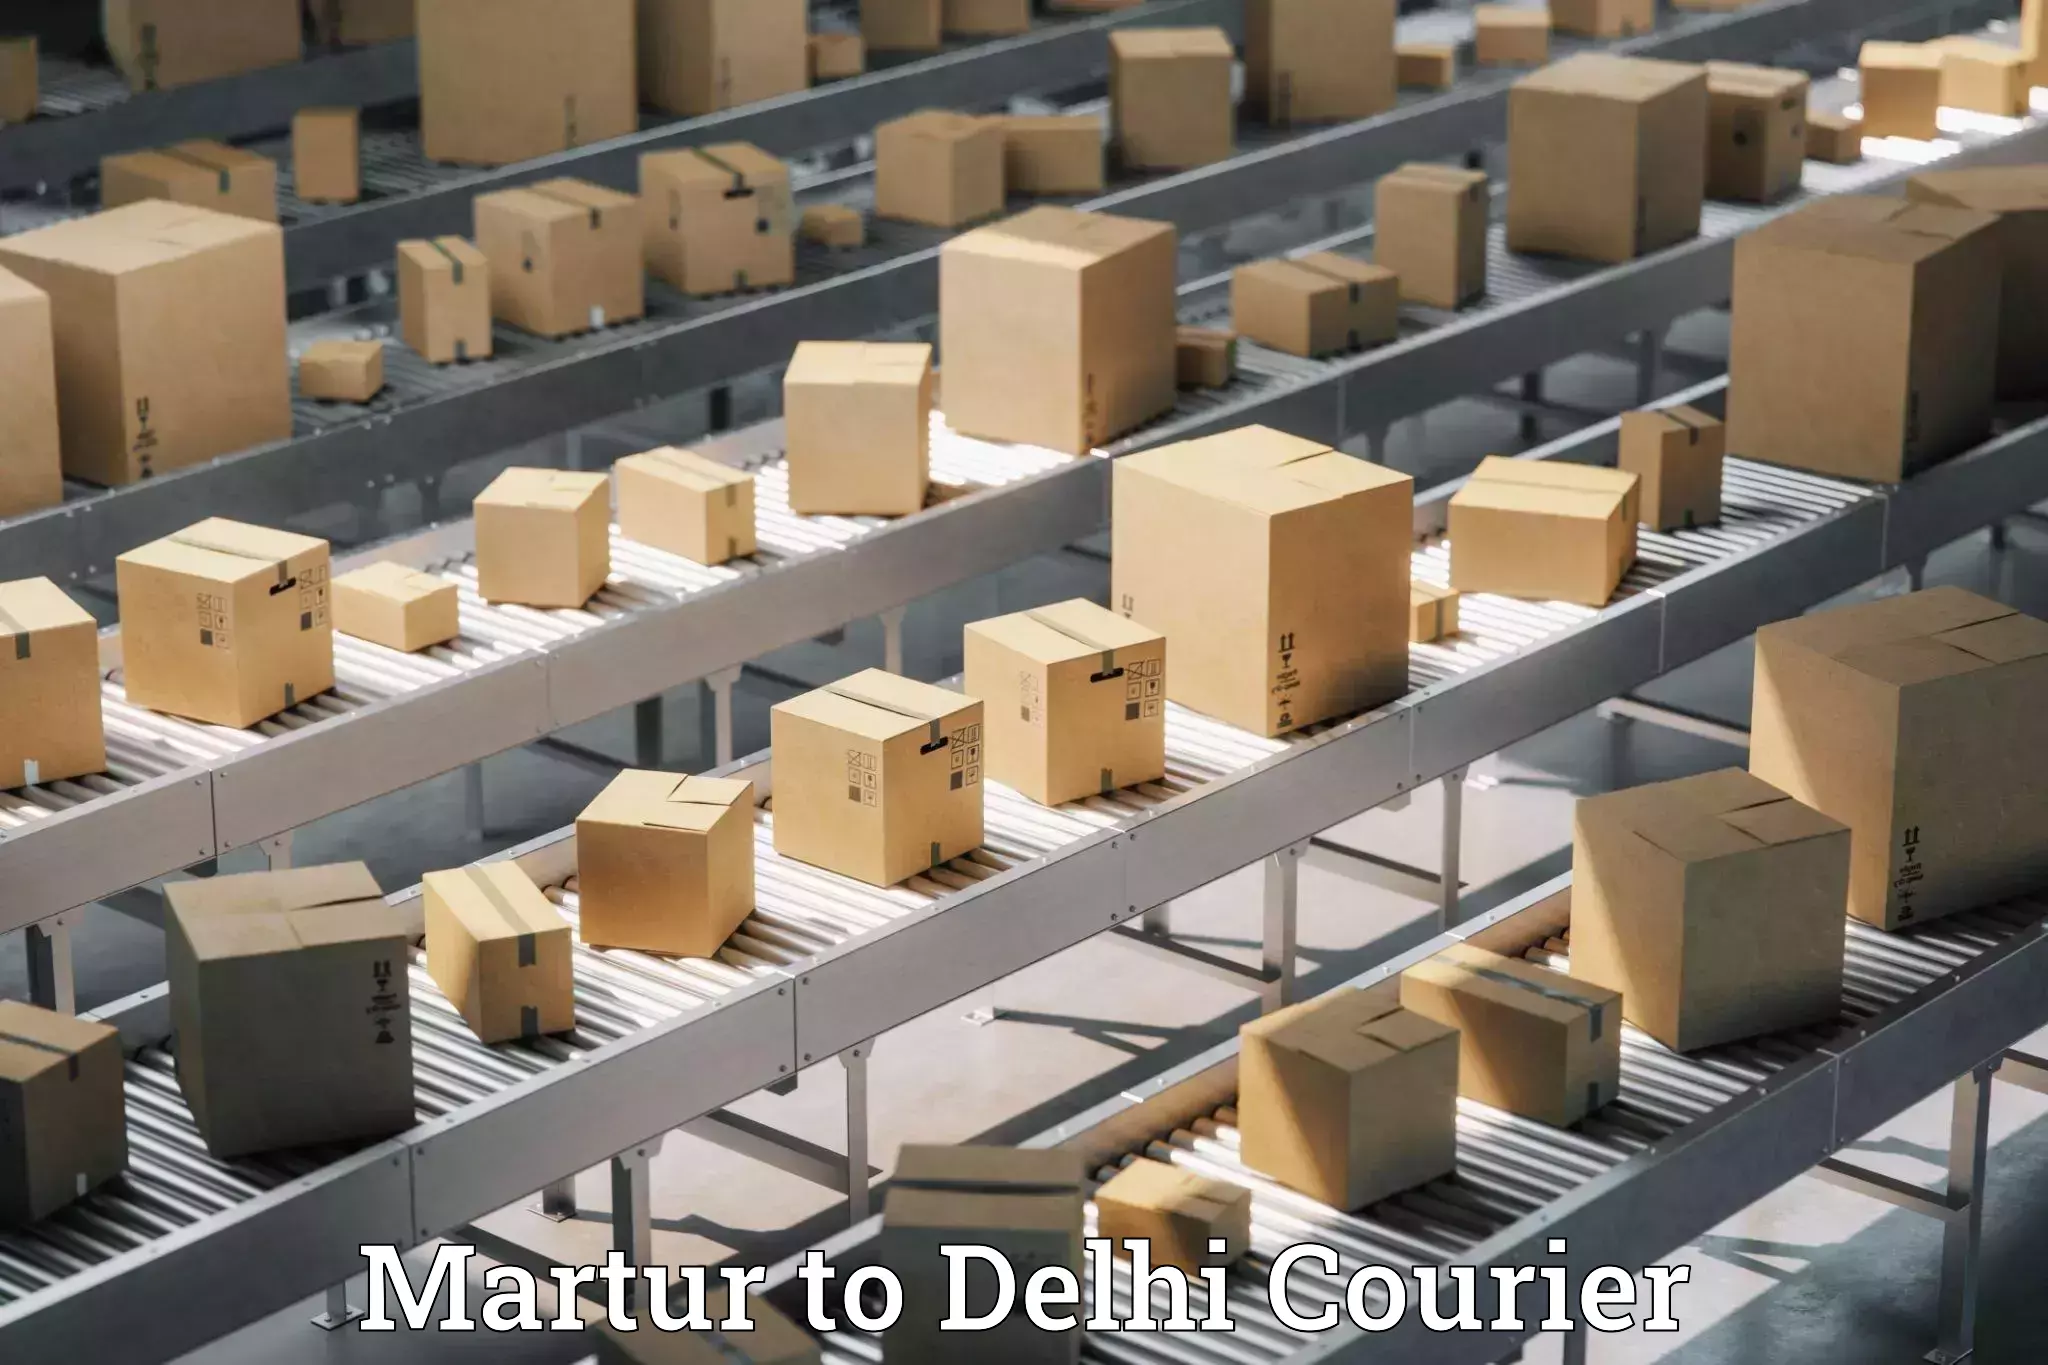 Nationwide shipping services Martur to Lodhi Road